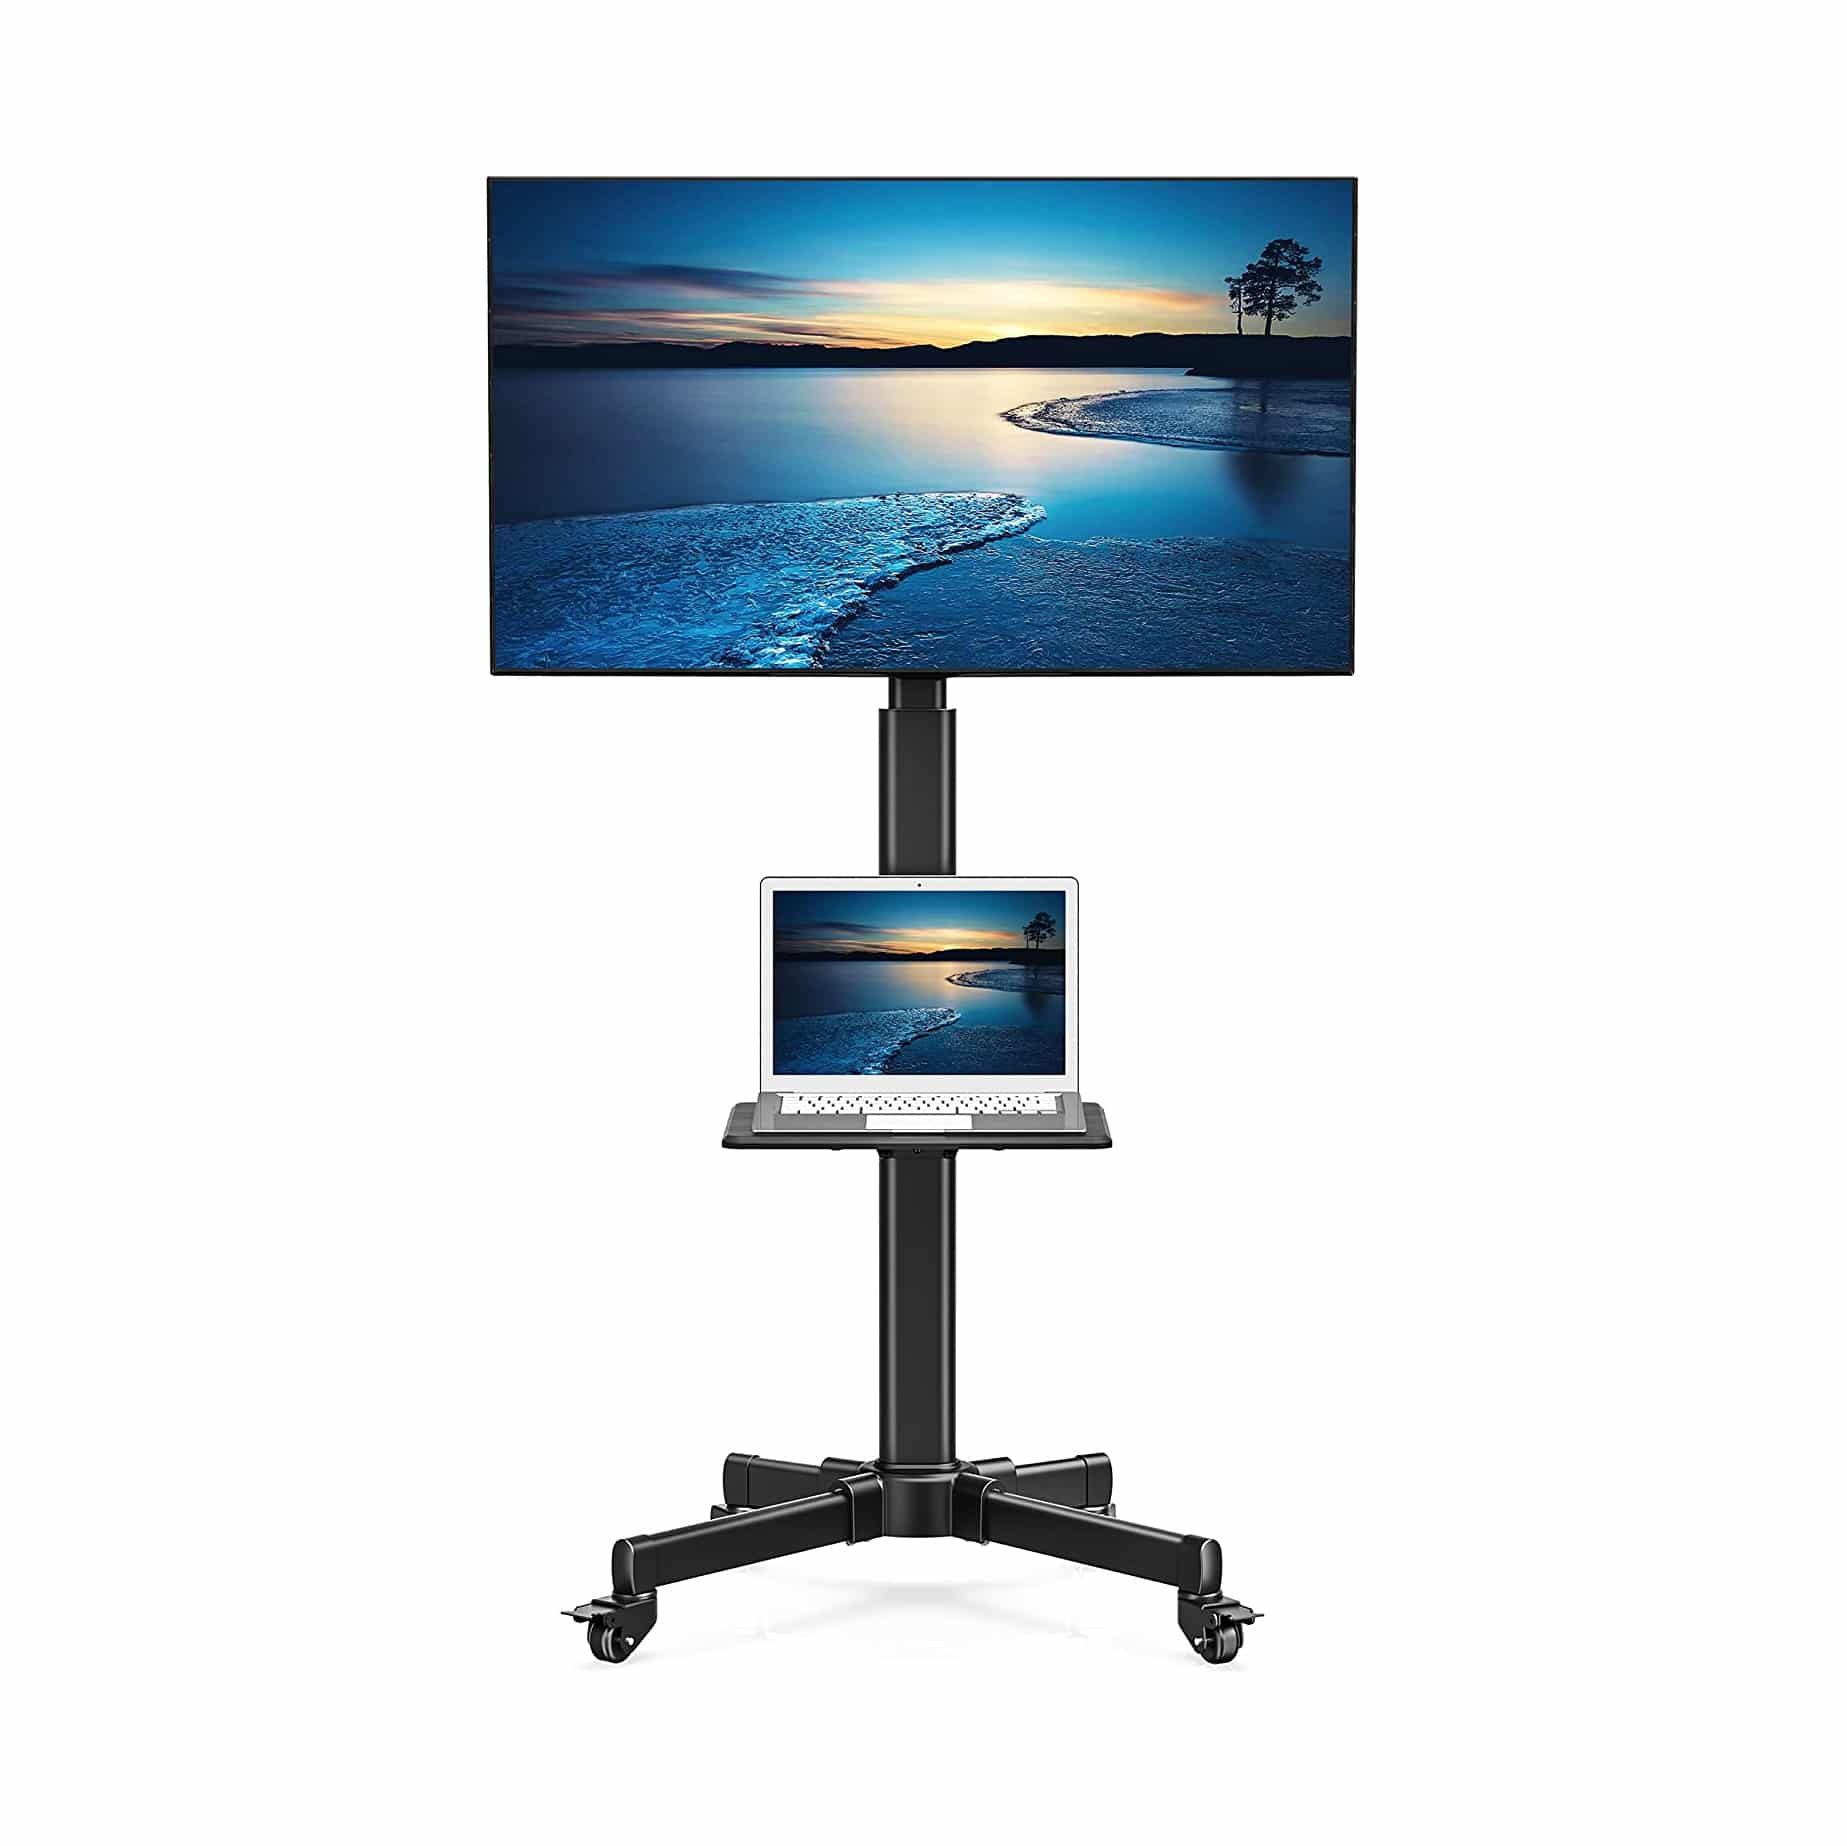 Top 10 Best Portable Tv Stands In 2023 Reviews | Buyer's Guide Inside Foldable Portable Adjustable Tv Stands (Gallery 13 of 20)